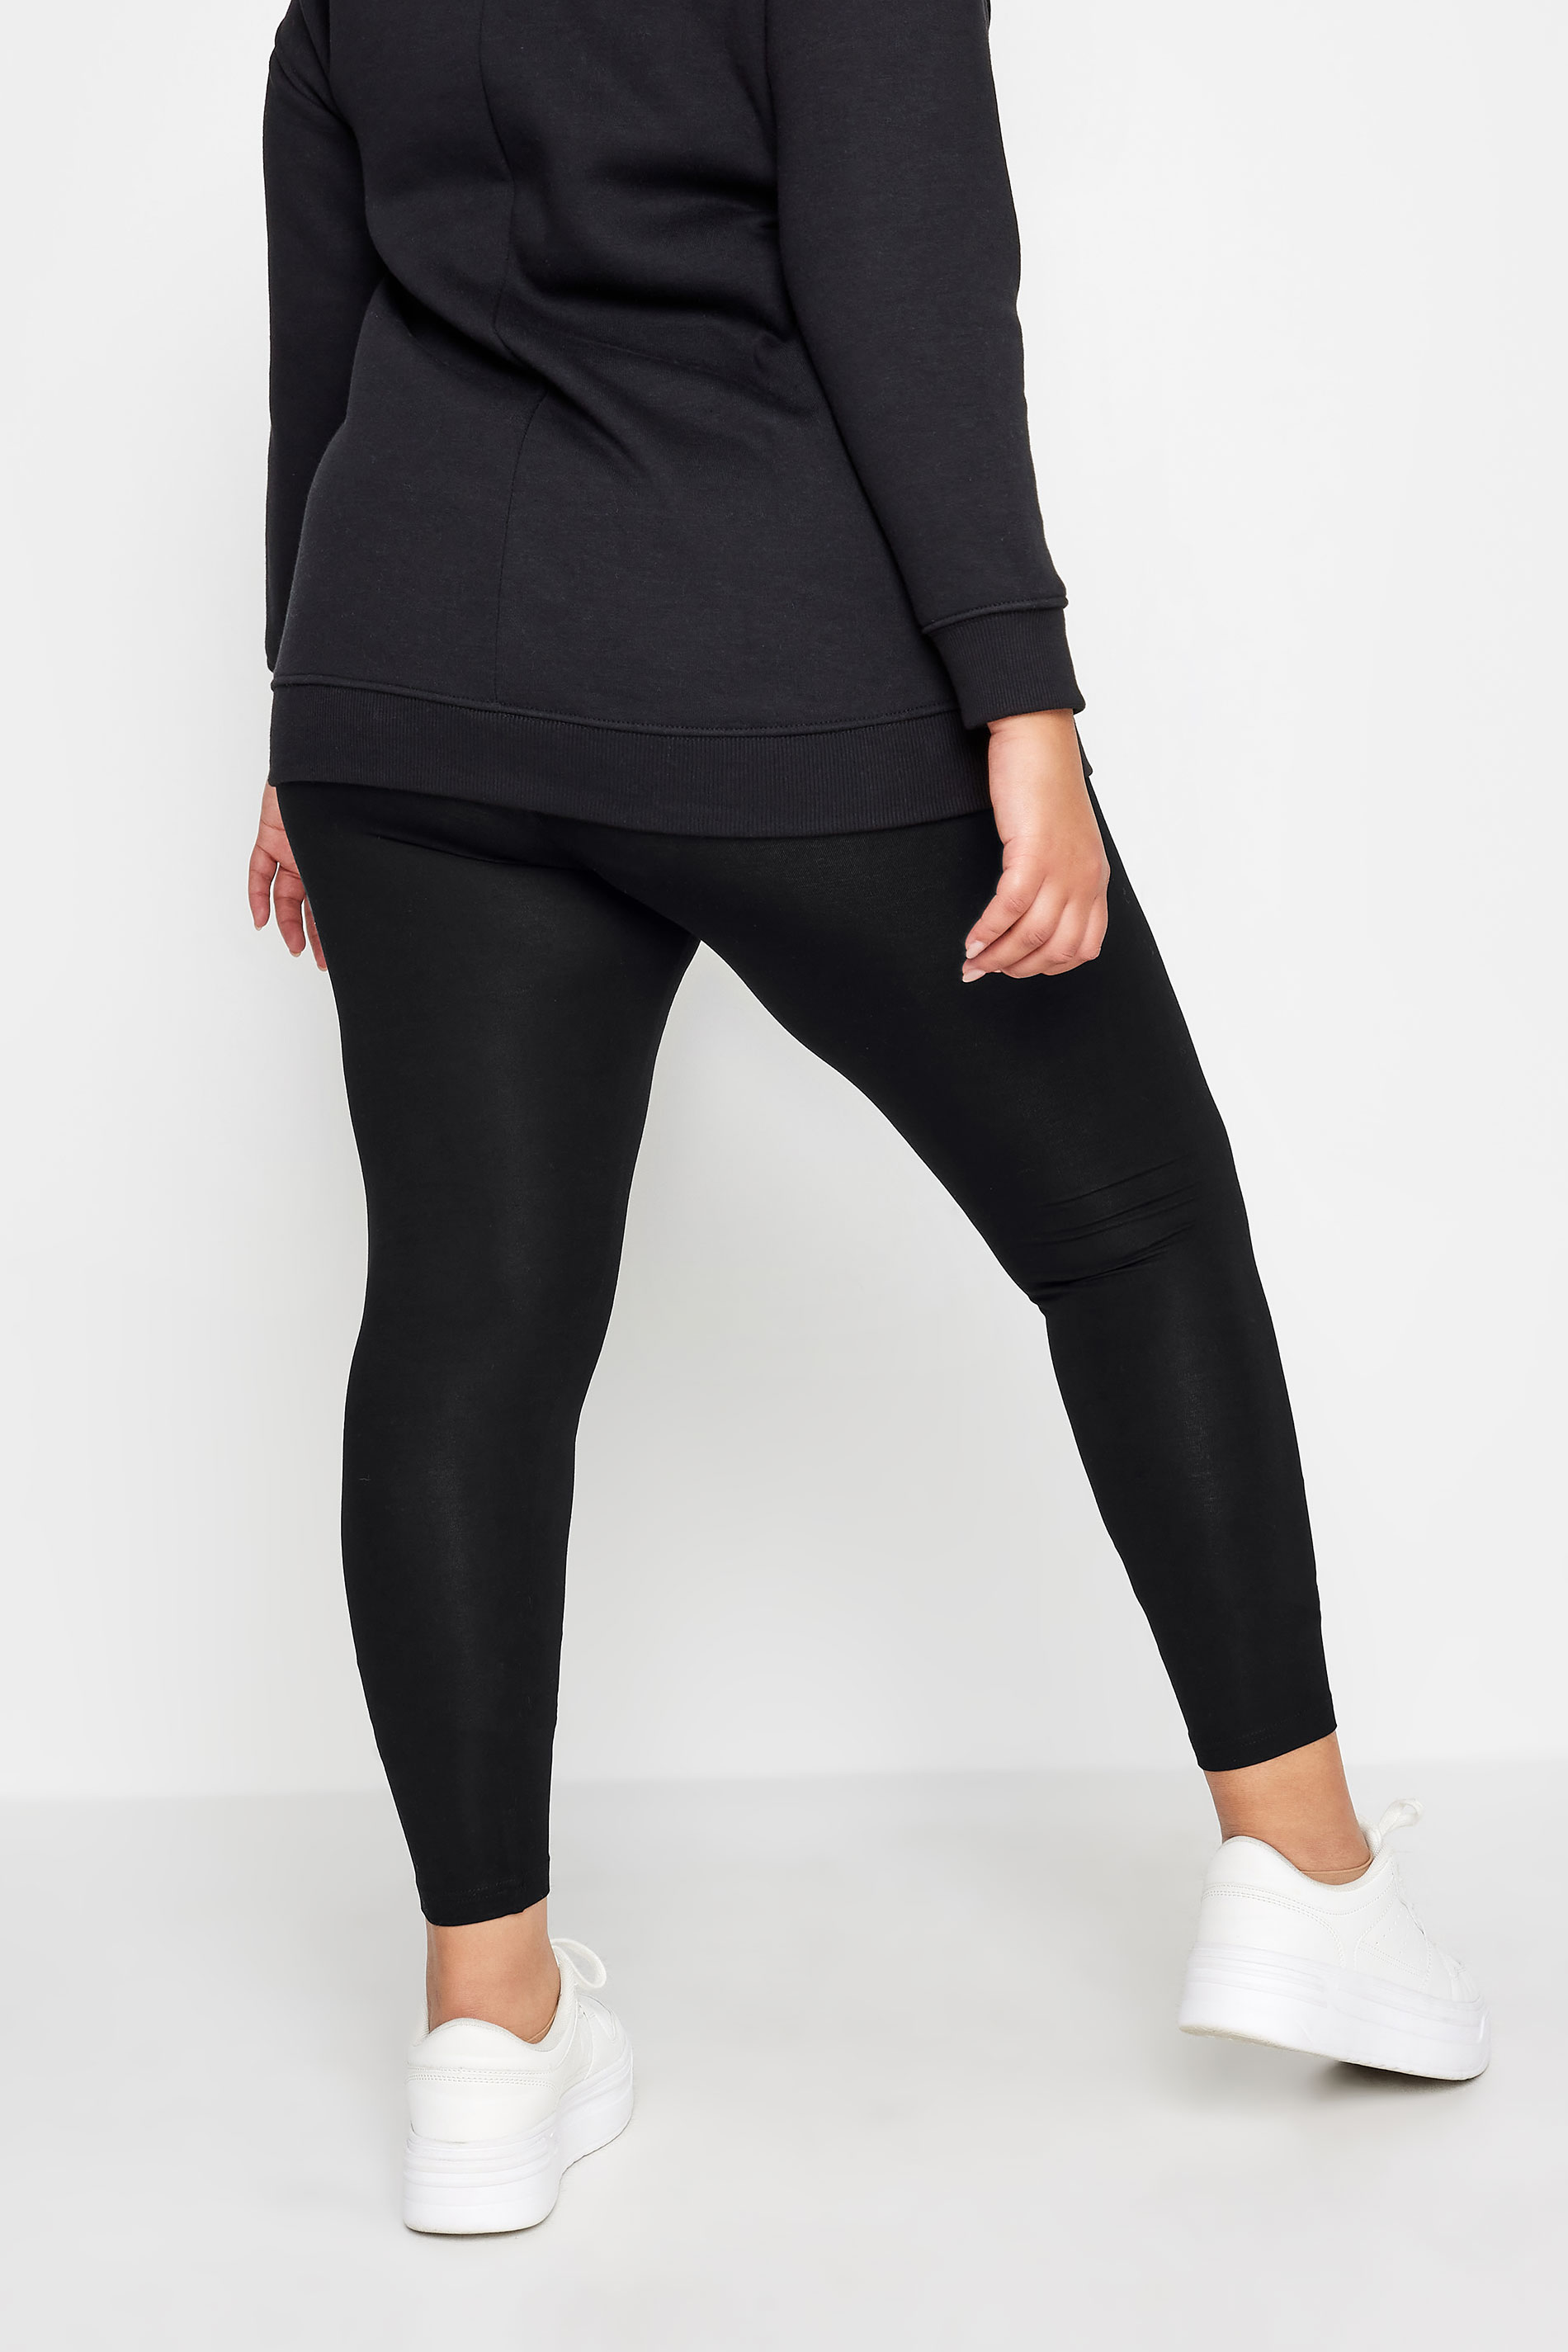 Buy Yours Curve Black 2 Pack Cotton Essential Leggings from Next India